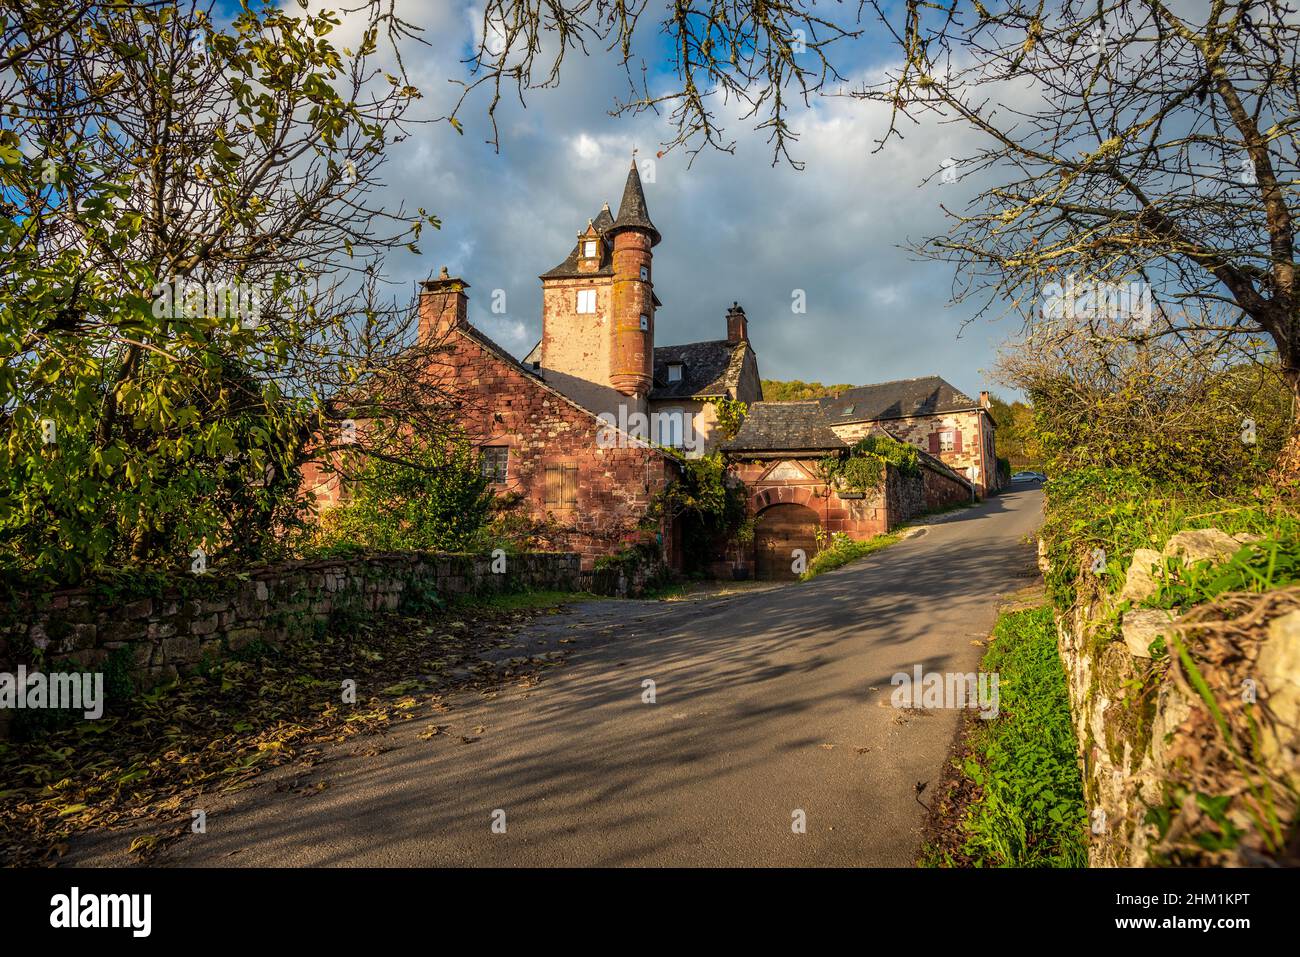 A picturesque and intricate red stone manor in Collonges-la-Rouge,  Correze, France, taken on a partly sunny autumn afternoon with no people. Stock Photo